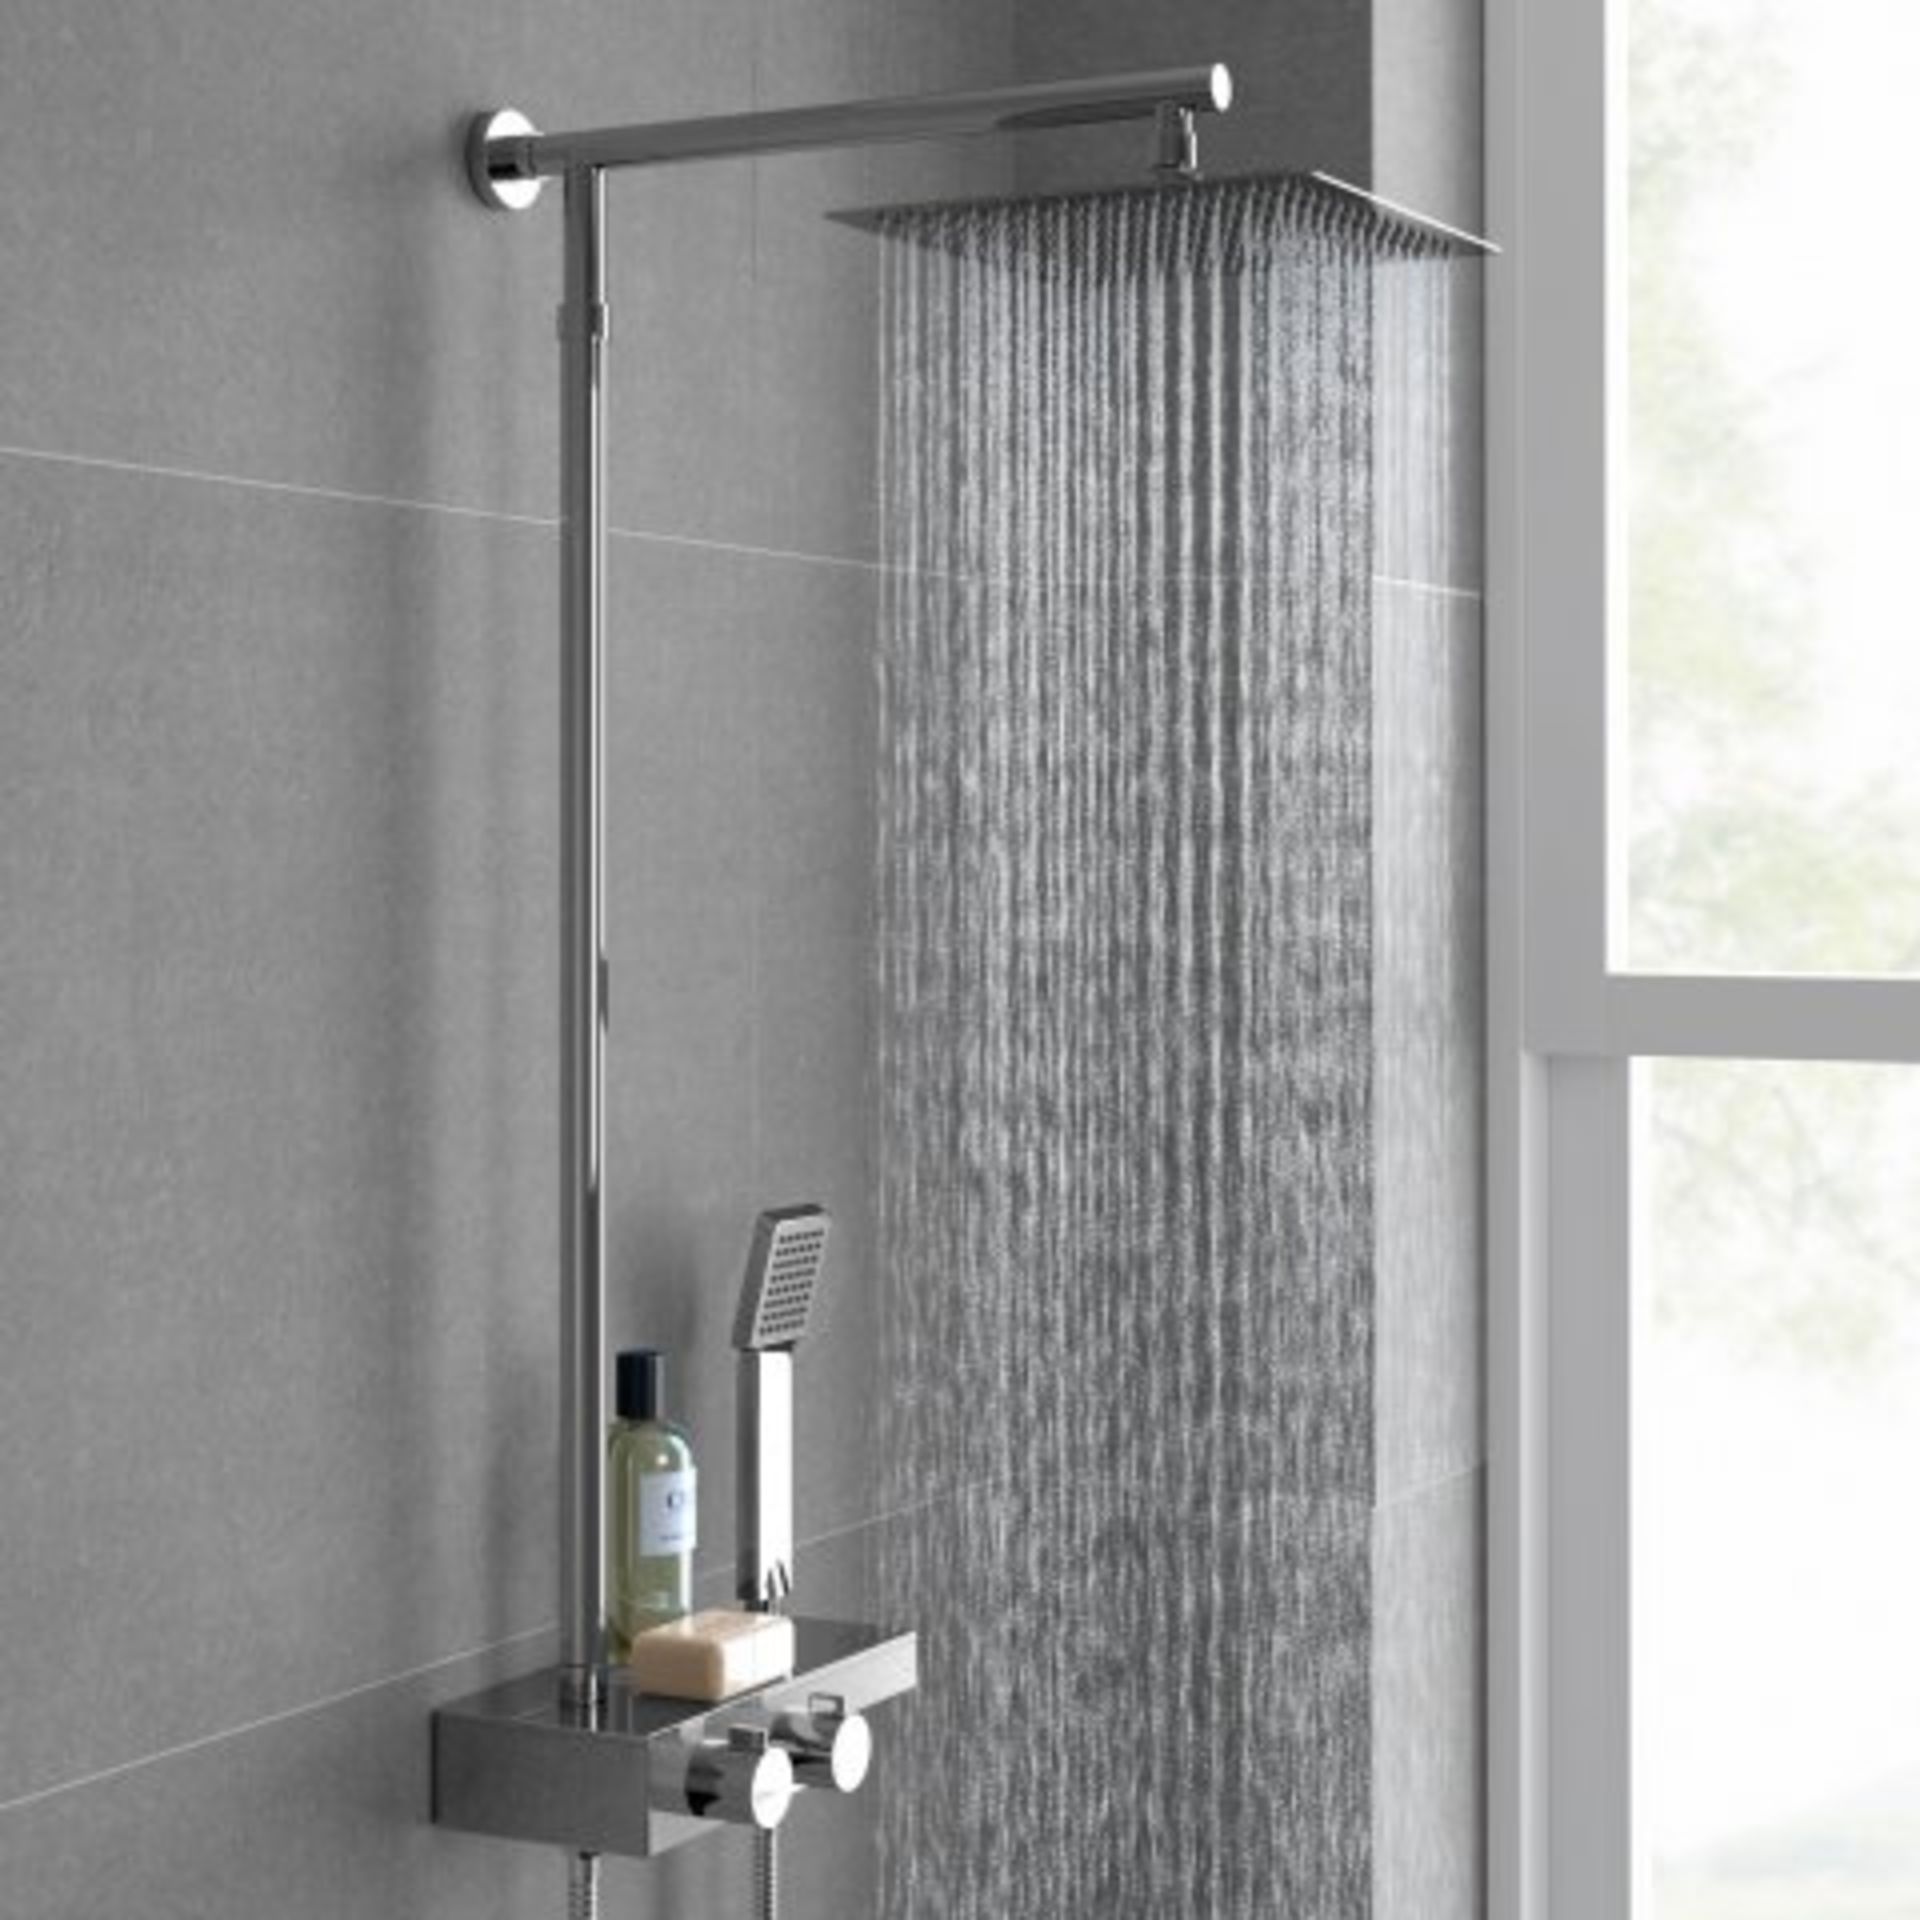 (O209) Thermostatic Exposed Shower Kit 250mm Square Head Handheld. RRP £349.99. Designer Style Our